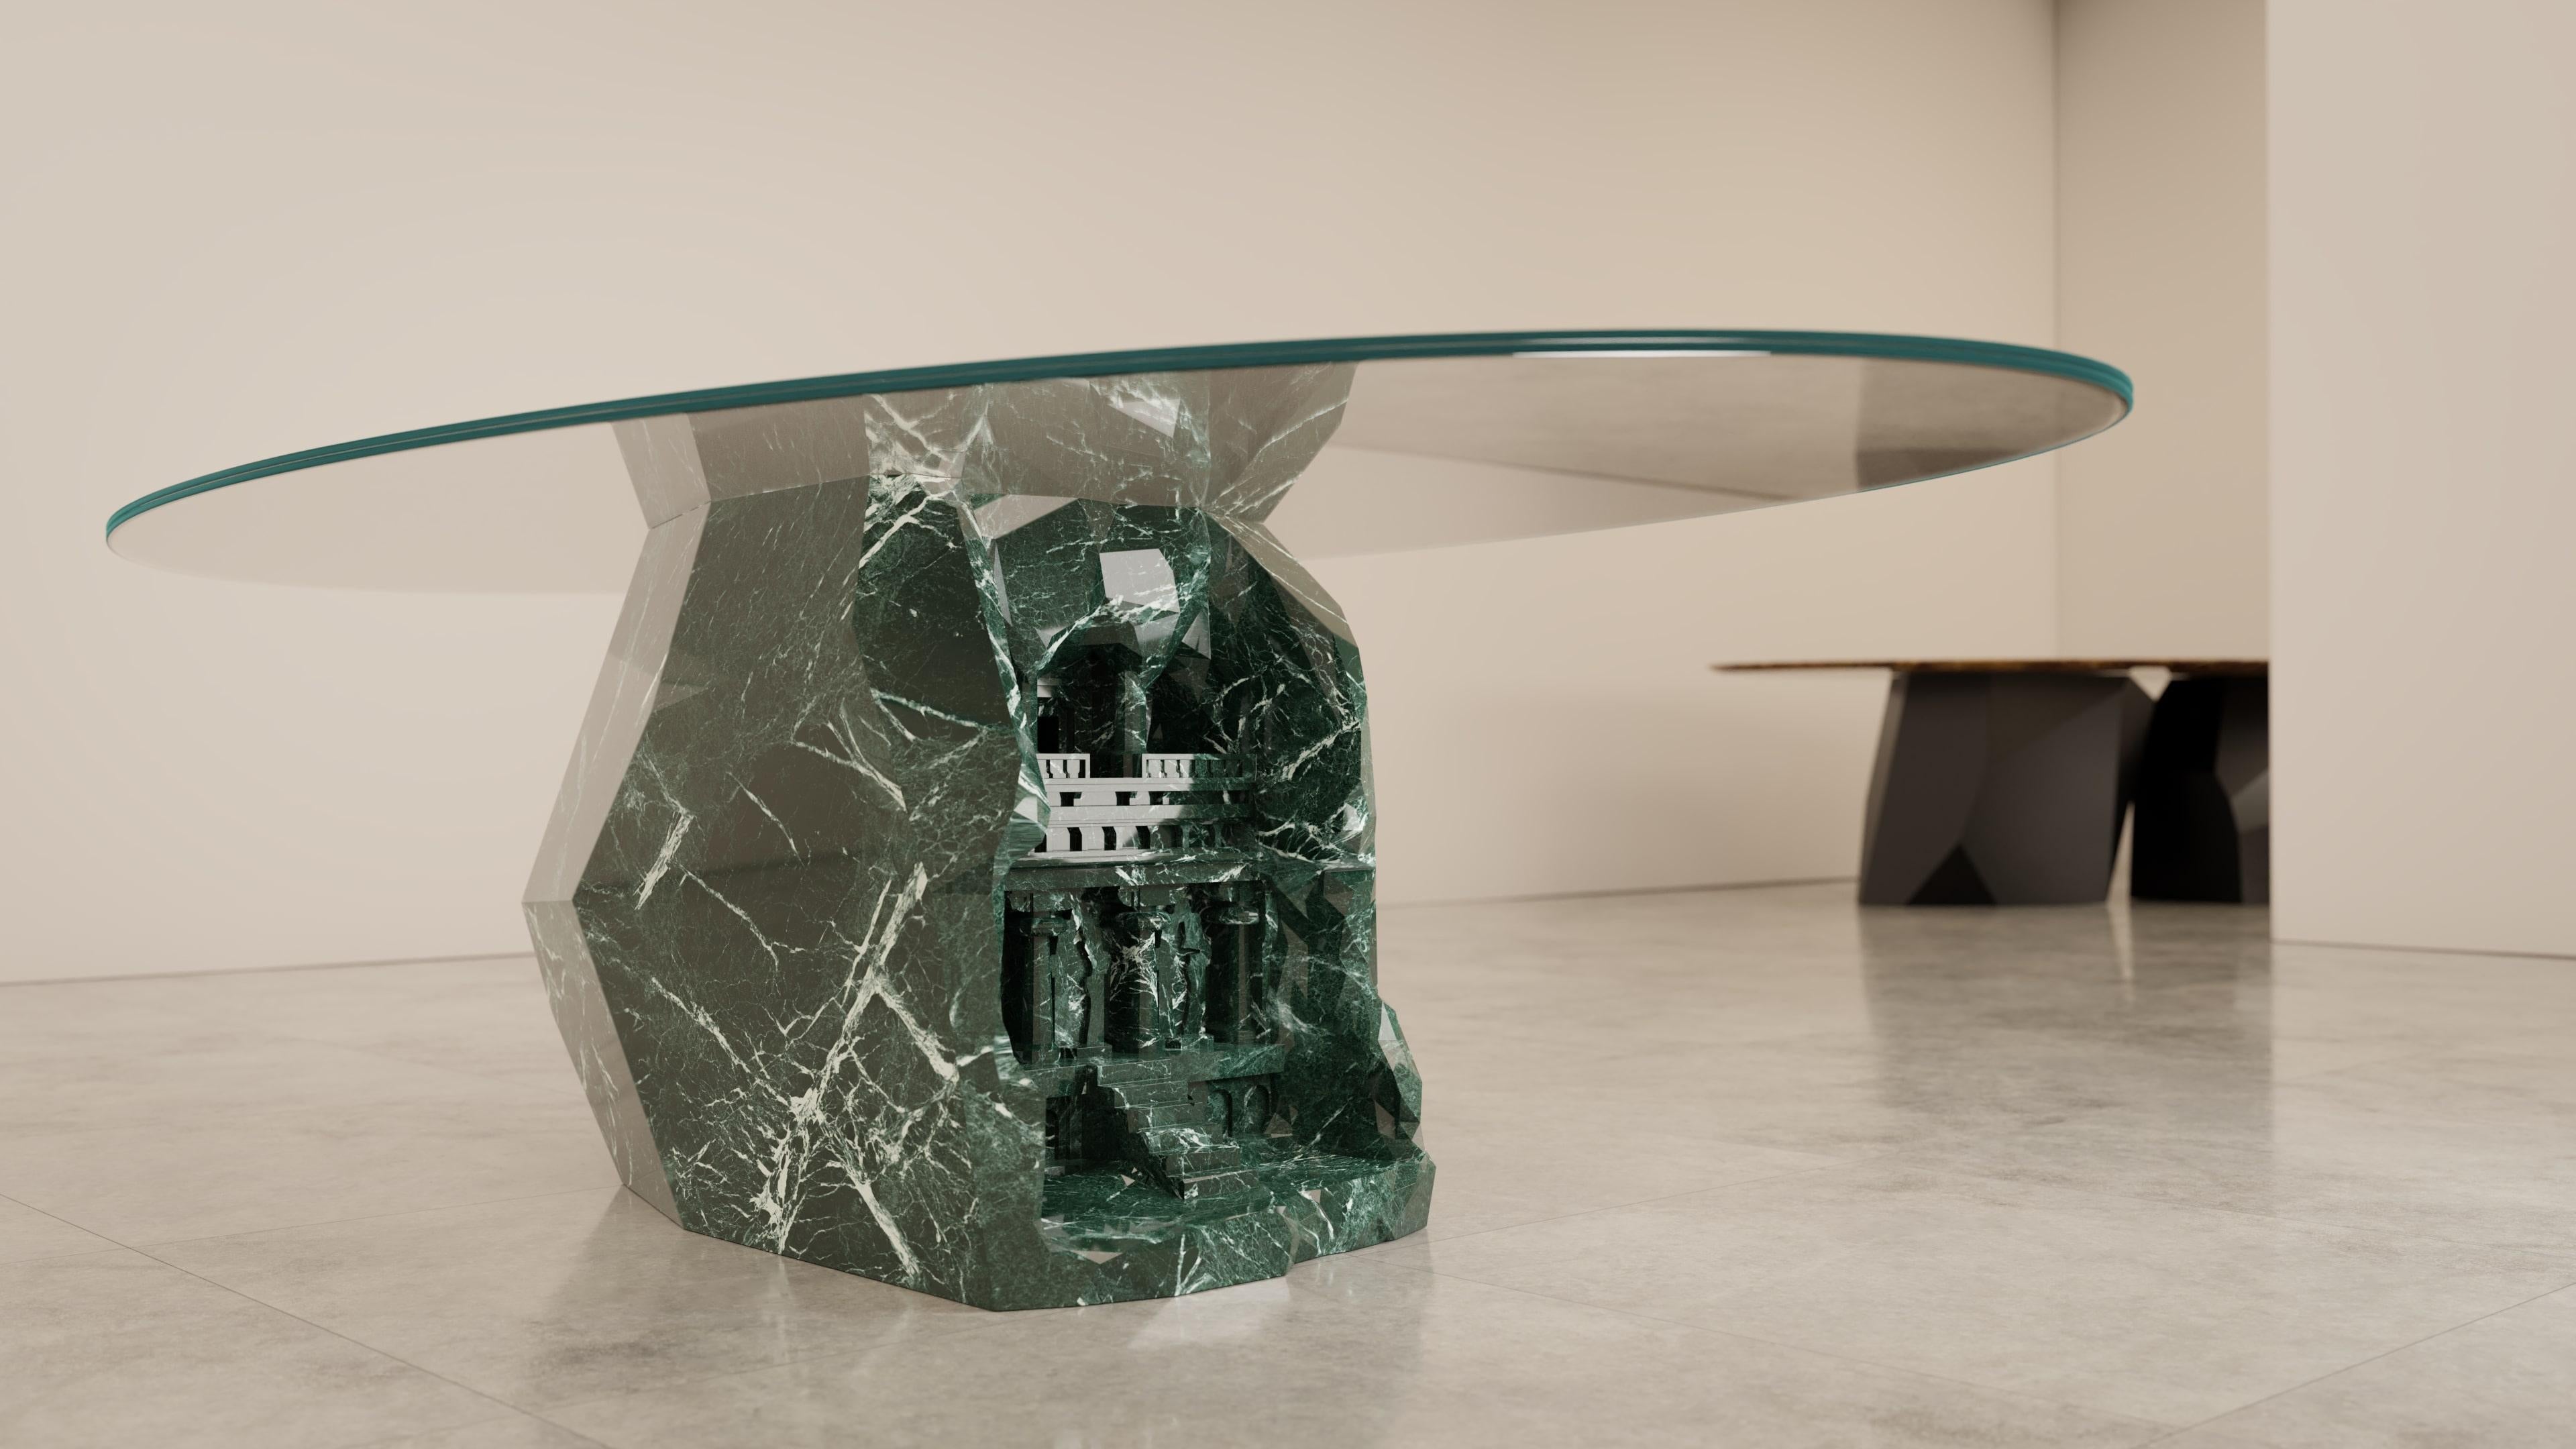 Civilization is a series of uniquely hand-carved marble tables, based on ancient Temples and Monuments hewn from their surrounding landscapes. The series pays homage to their great artistry, to create pieces that will last for the civilizations that